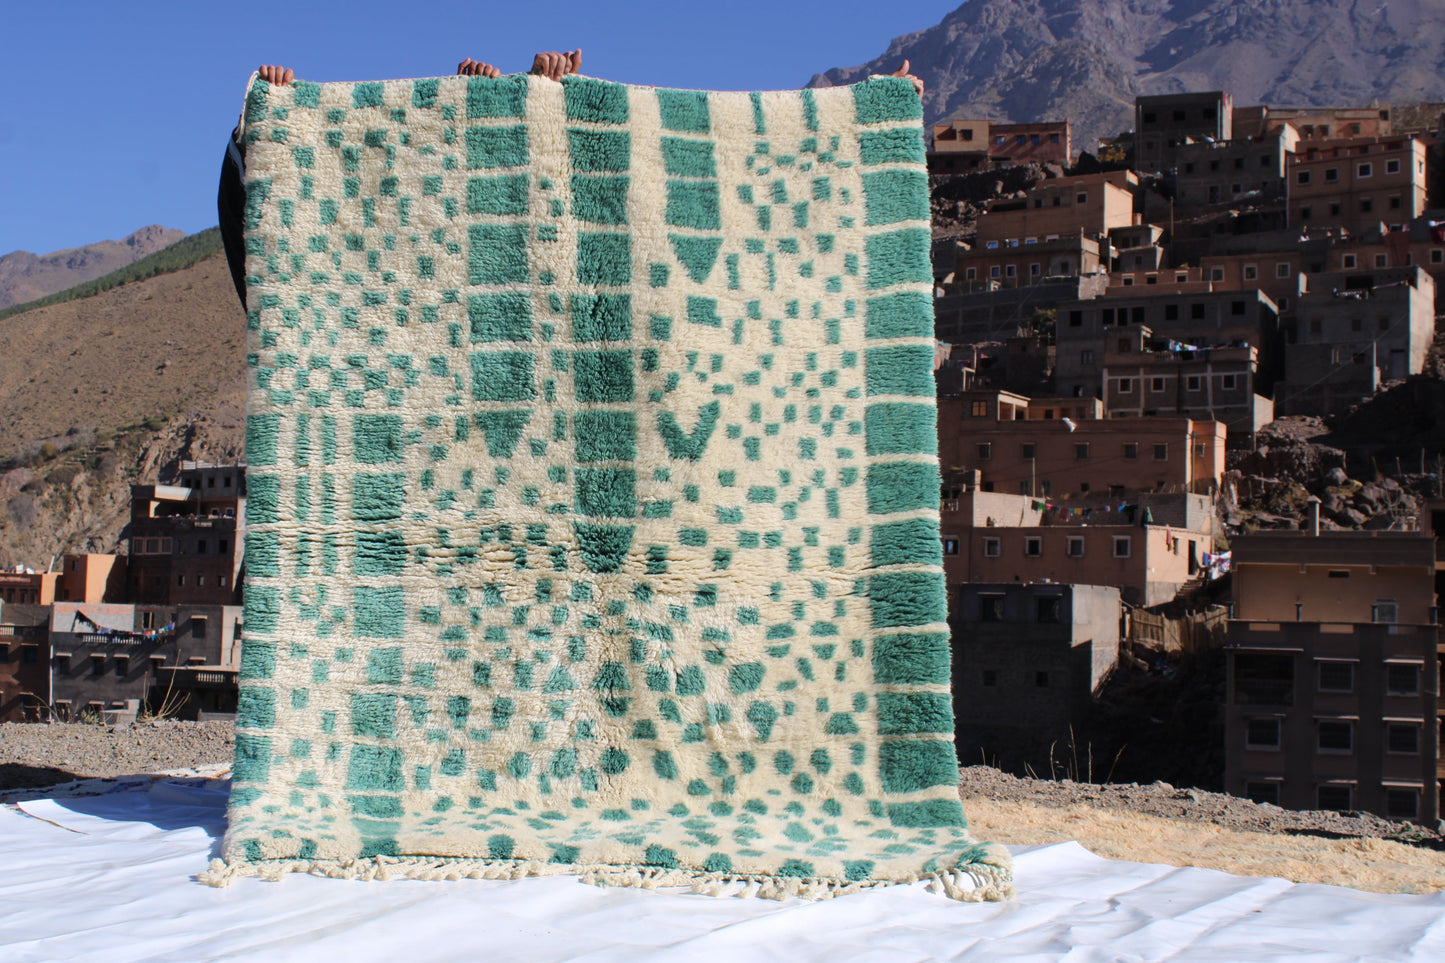 Beni Ourain rugs originate from the Atlas Mountains of Morocco and are characterized by their distinctive, neutral-toned, and geometric designs. These handwoven rugs often feature a plush pile and are made by the Berber tribes,  size is 215x160 cm